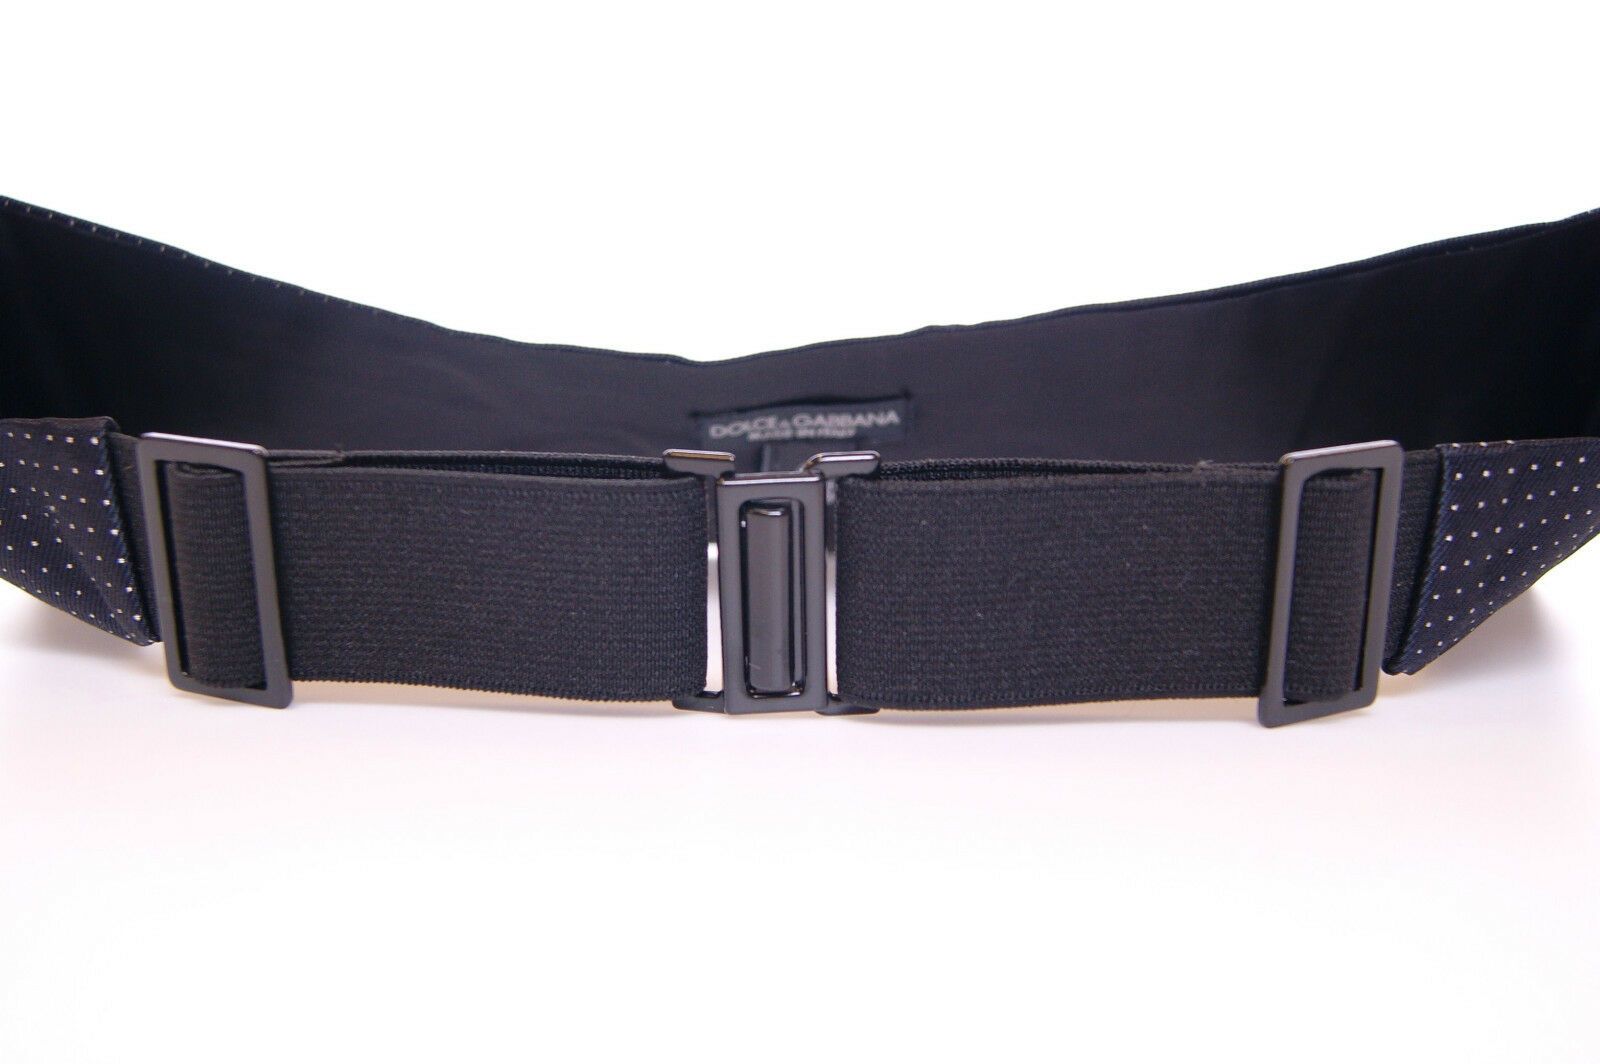 Blue Waist Smoking Tuxedo Cummerbund Belt - Designed by Dolce & Gabbana Available to Buy at a Discounted Price on Moon Behind The Hill Online Designer Discount Store